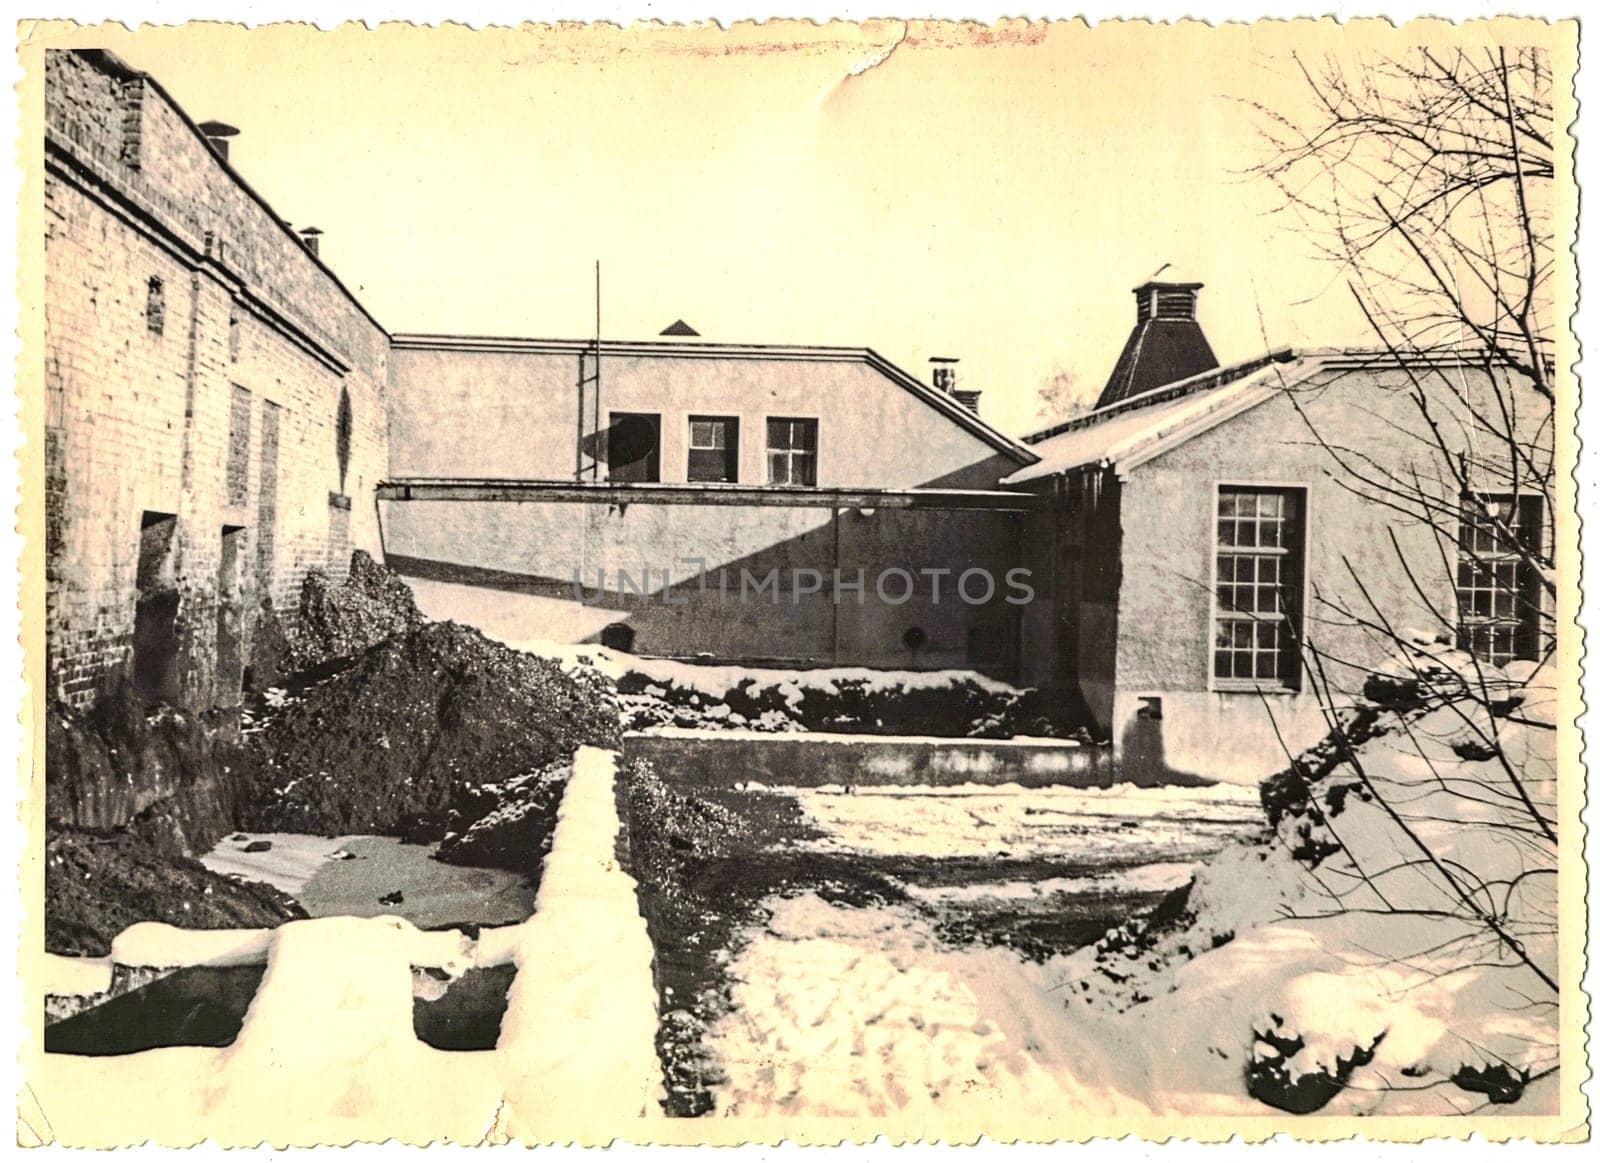 FRAUREUTH, EAST GERMANY - FEBRUARY 1965: The retro photo shows old industry zone in former East Germany. Black and white photo.